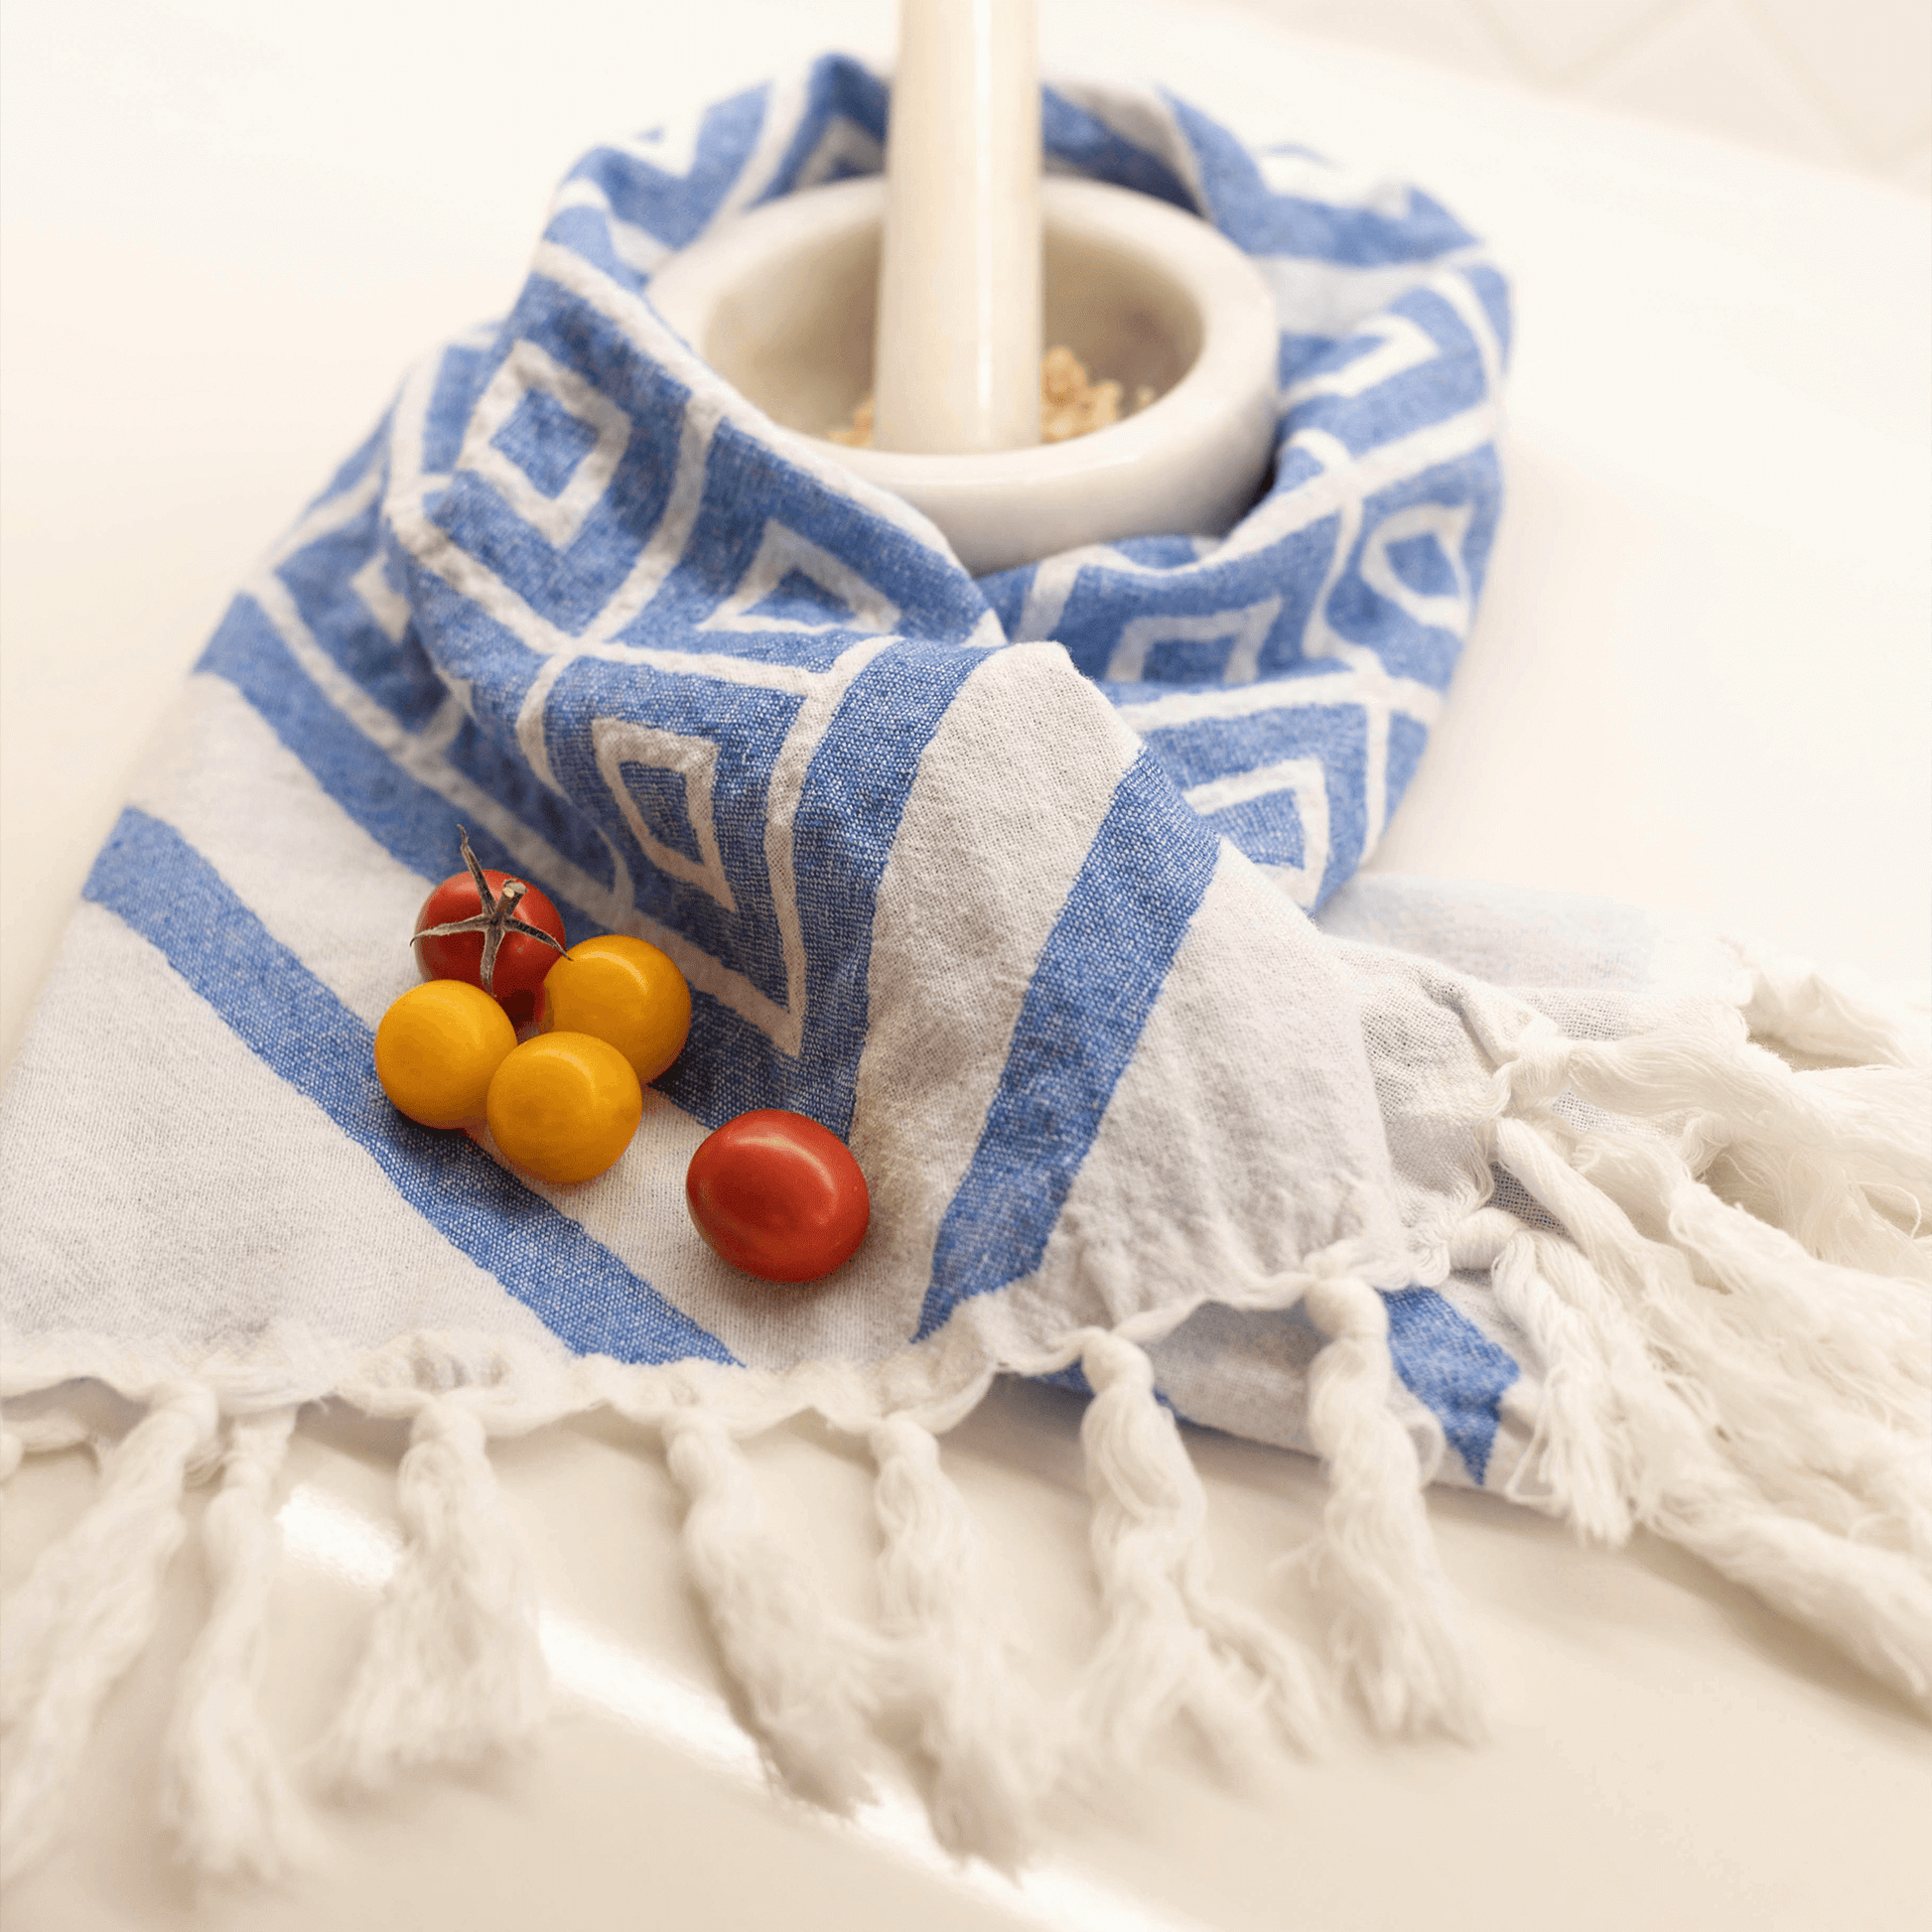 Blue and white hand Turkish Towel in the kitchen with cherry tomatoes